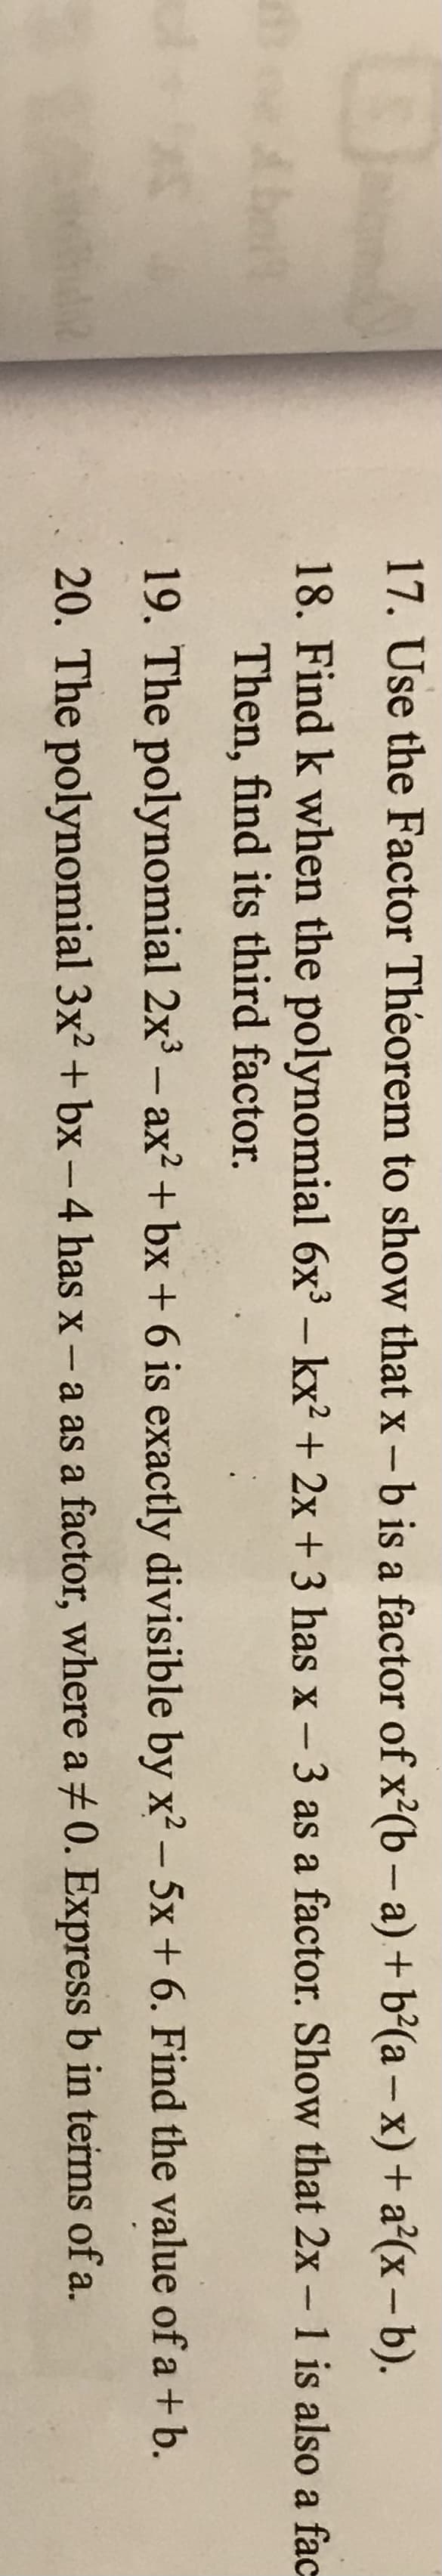 17. Use the Factor Theorem to show that x -b is a factor of x²(b – a) + b²(a – x) + a²(x – b).
Abelt
18. Find k when the polynomial 6x³ – kx? + 2x + 3 has x - 3 as a factor. Show that 2x- 1 is also a fac
Then, find its third factor.
19. The polynomial 2x3 – ax? + bx + 6 is exactly divisible by x? – 5x + 6. Find the value of a + b.
20. The polynomial 3x2 + bx - 4 has x- a as a factor, where a +0. Express b in terms of a.
